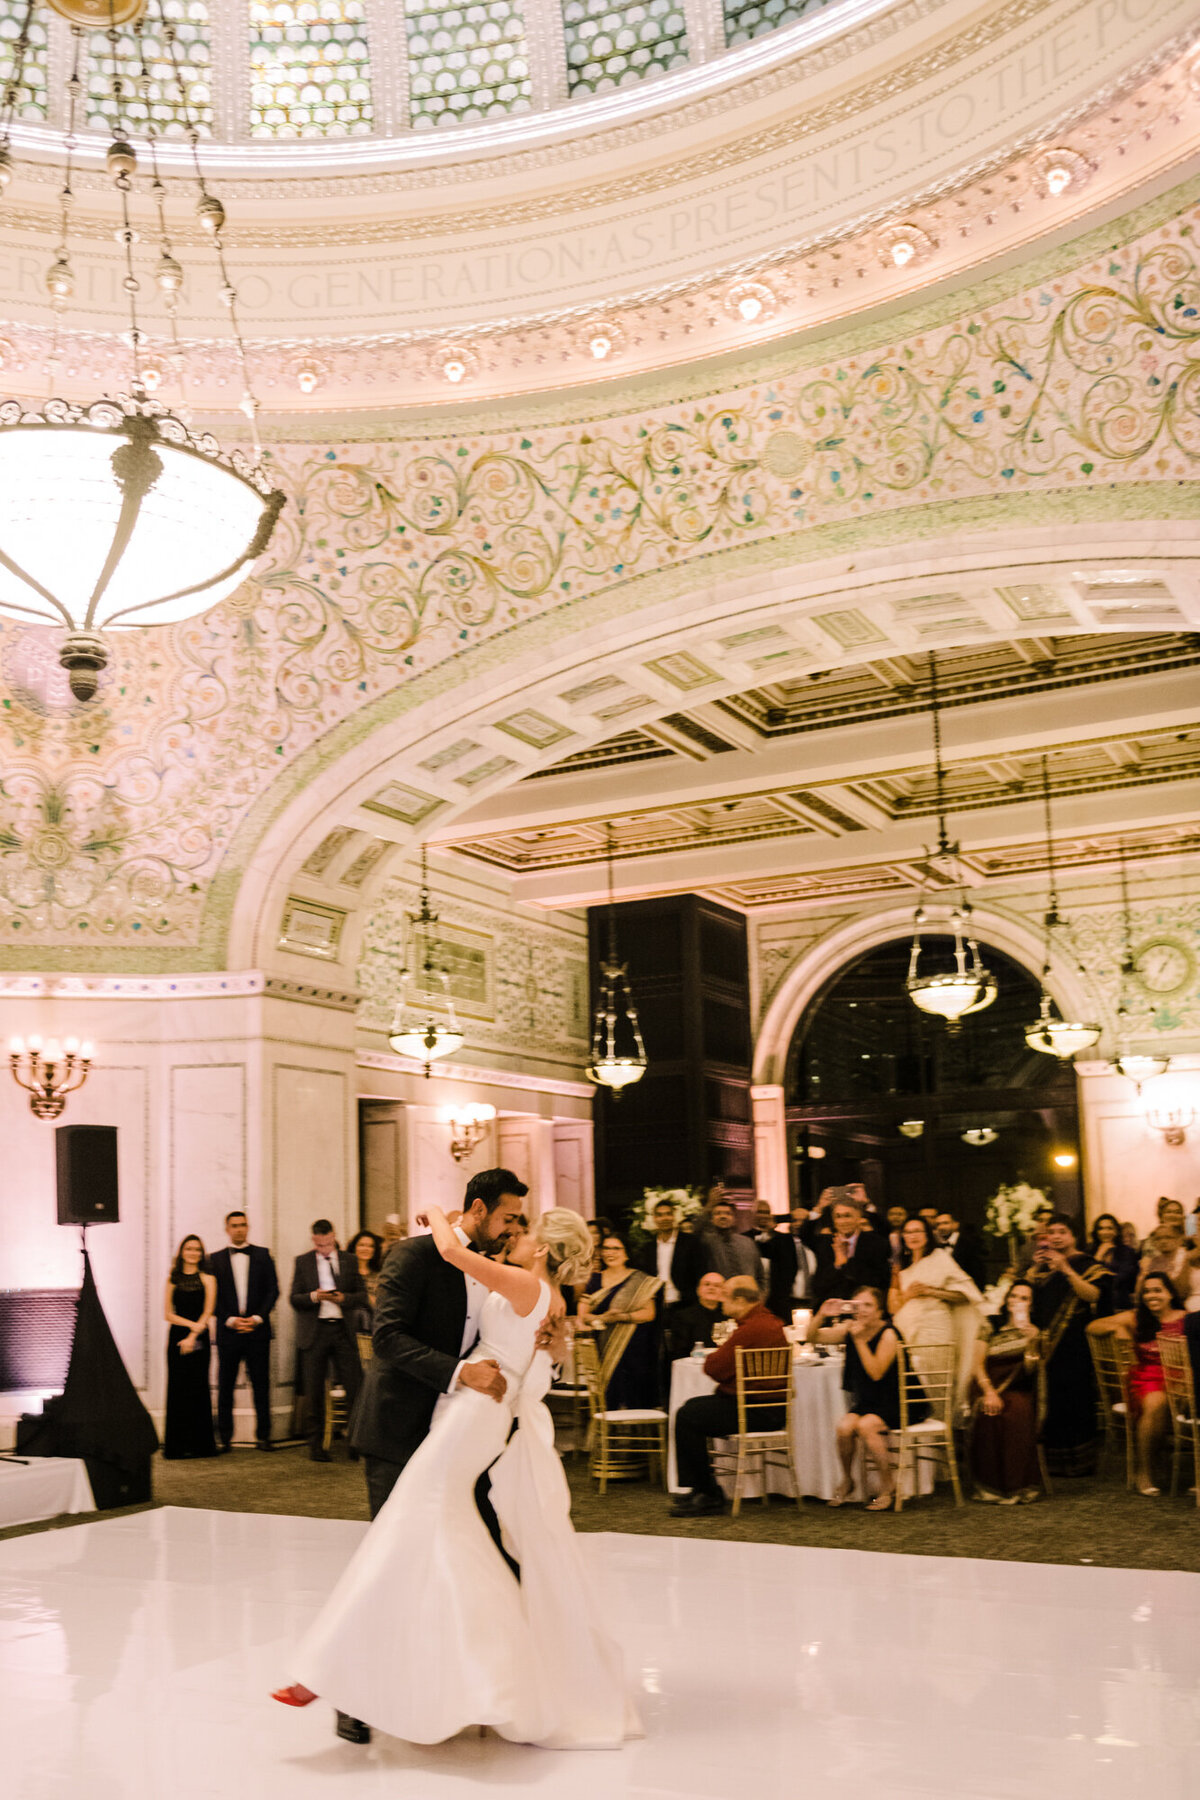 A beautiful first dance at a wedding reception held at the Chicago Cultural Center